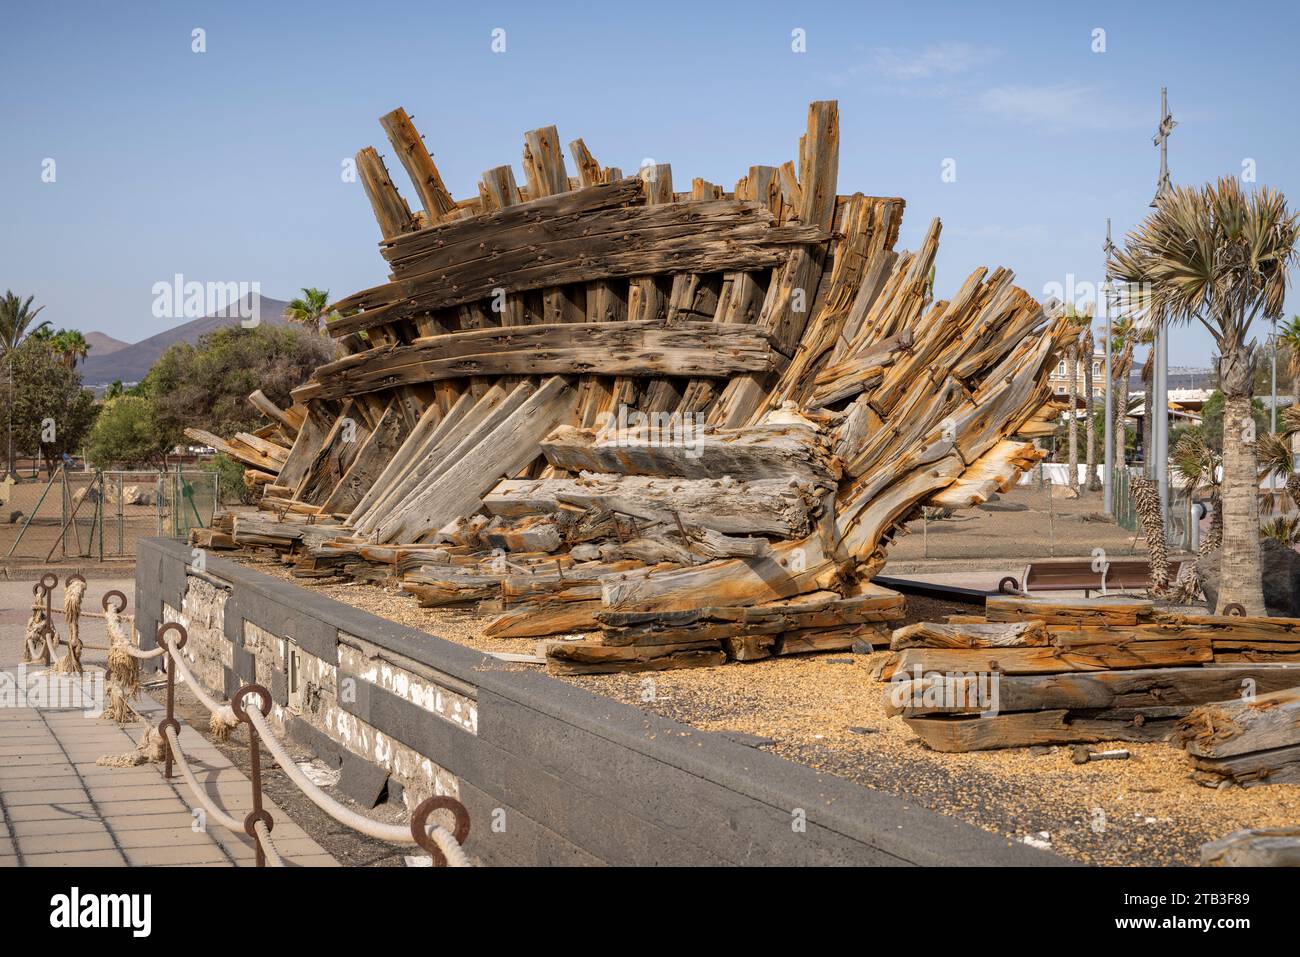 Old wooden ship wreck on display on the Arrecife sea front, Lanzarote, Canary Islands, Spain. Stock Photo